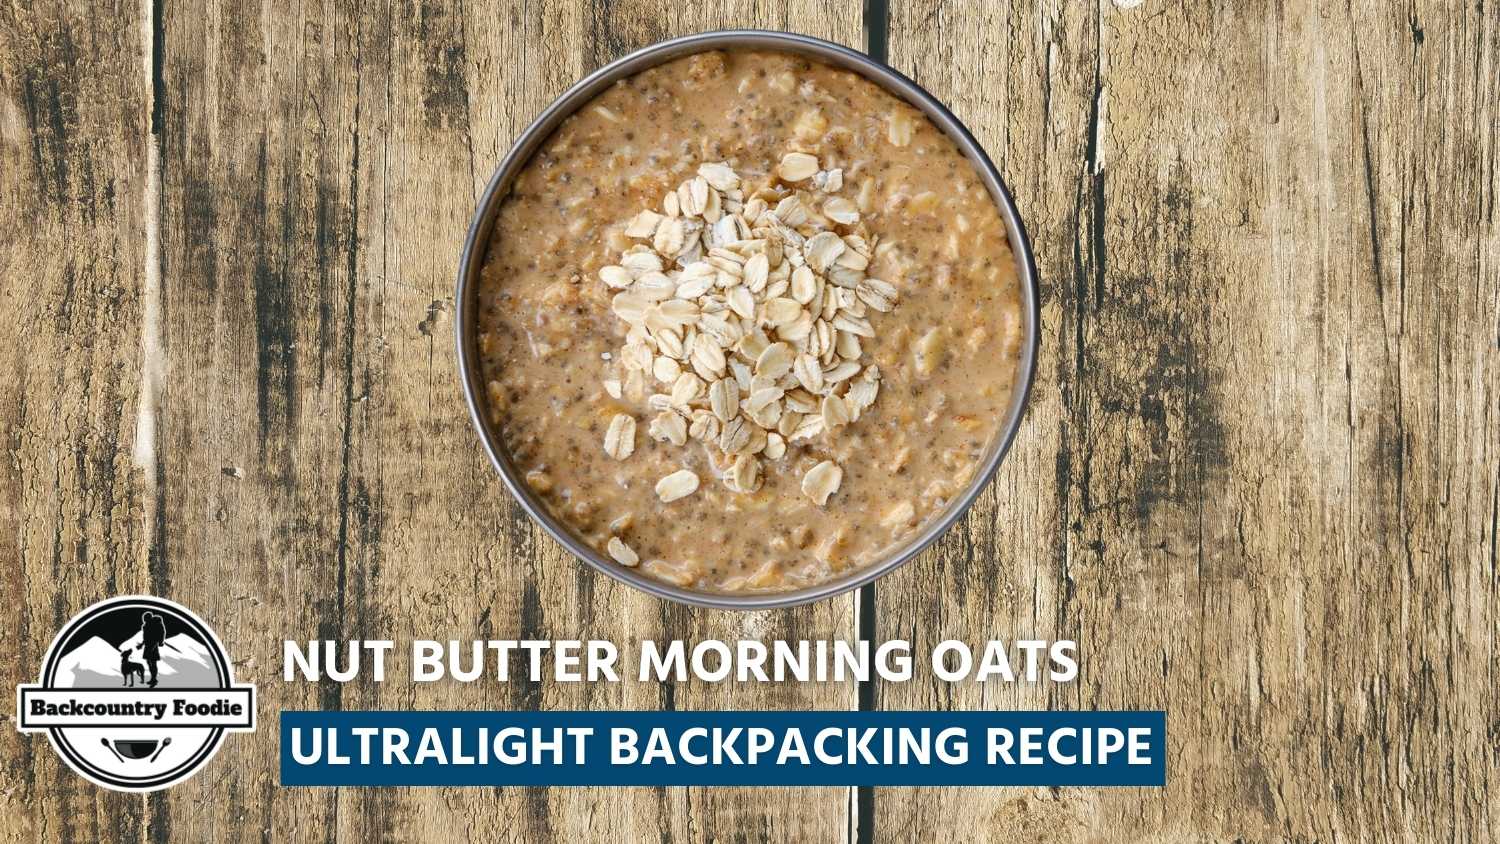 Backcountry Foodie Blog Nut Butter Morning Oats Ultralight Backpacking Recipe